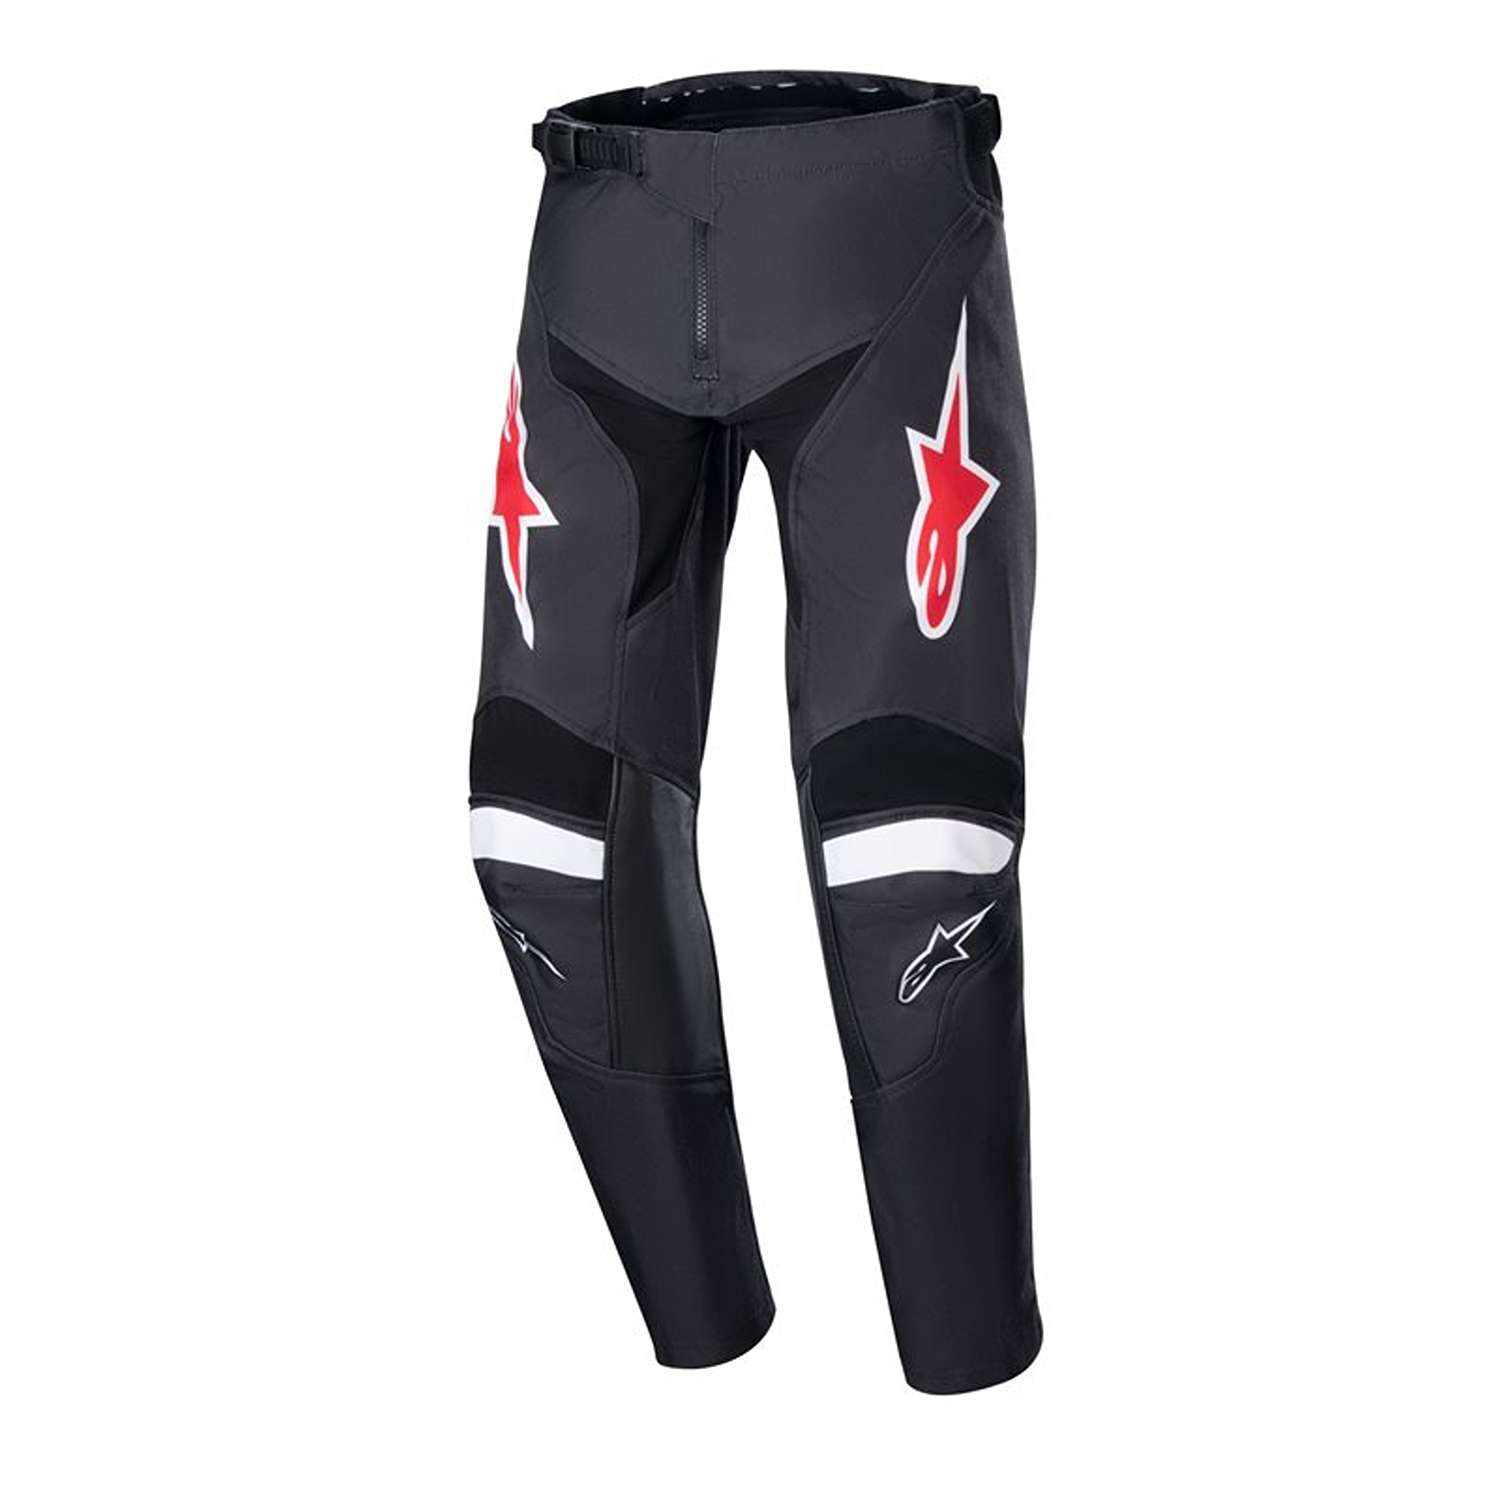 Image of Alpinestars Youth Racer Lucent Pants Black White Taille 26